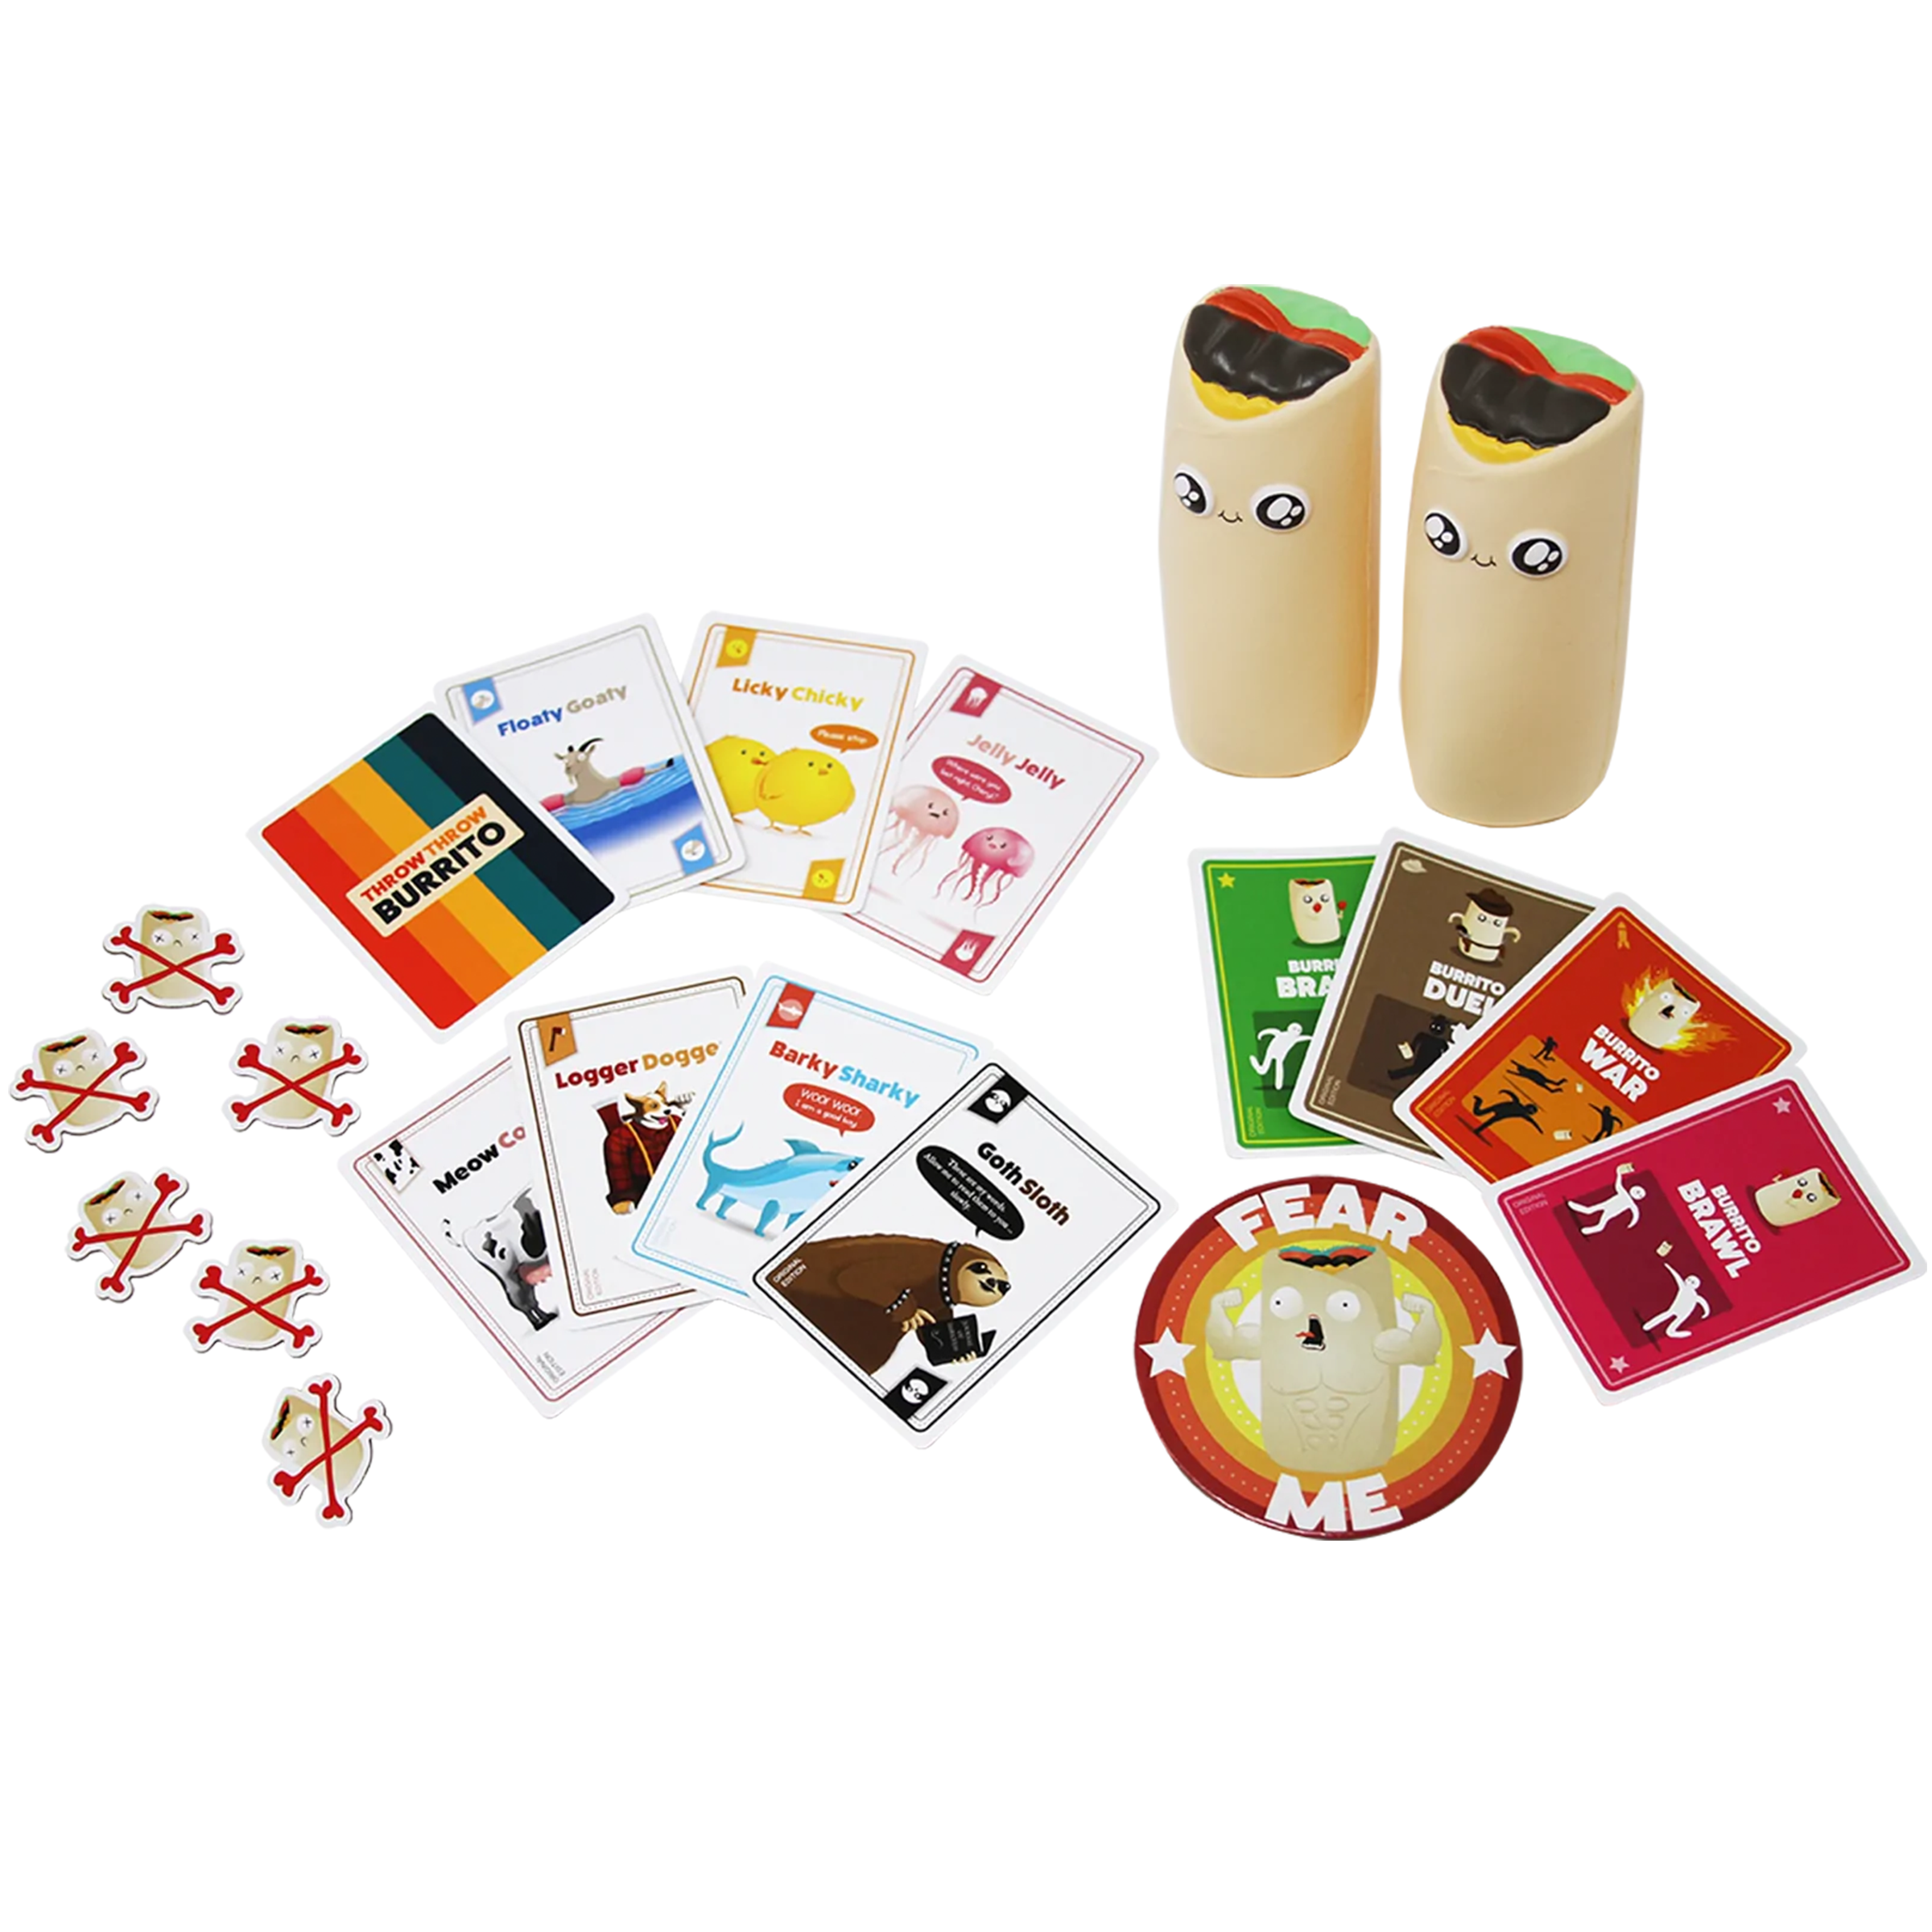 Throw Throw Burrito by Exploding Kittens - A Dodgeball Card Game - Family-Friendly Party Games - for Adults, Teens & Kids - 2-6 Players - image 5 of 6